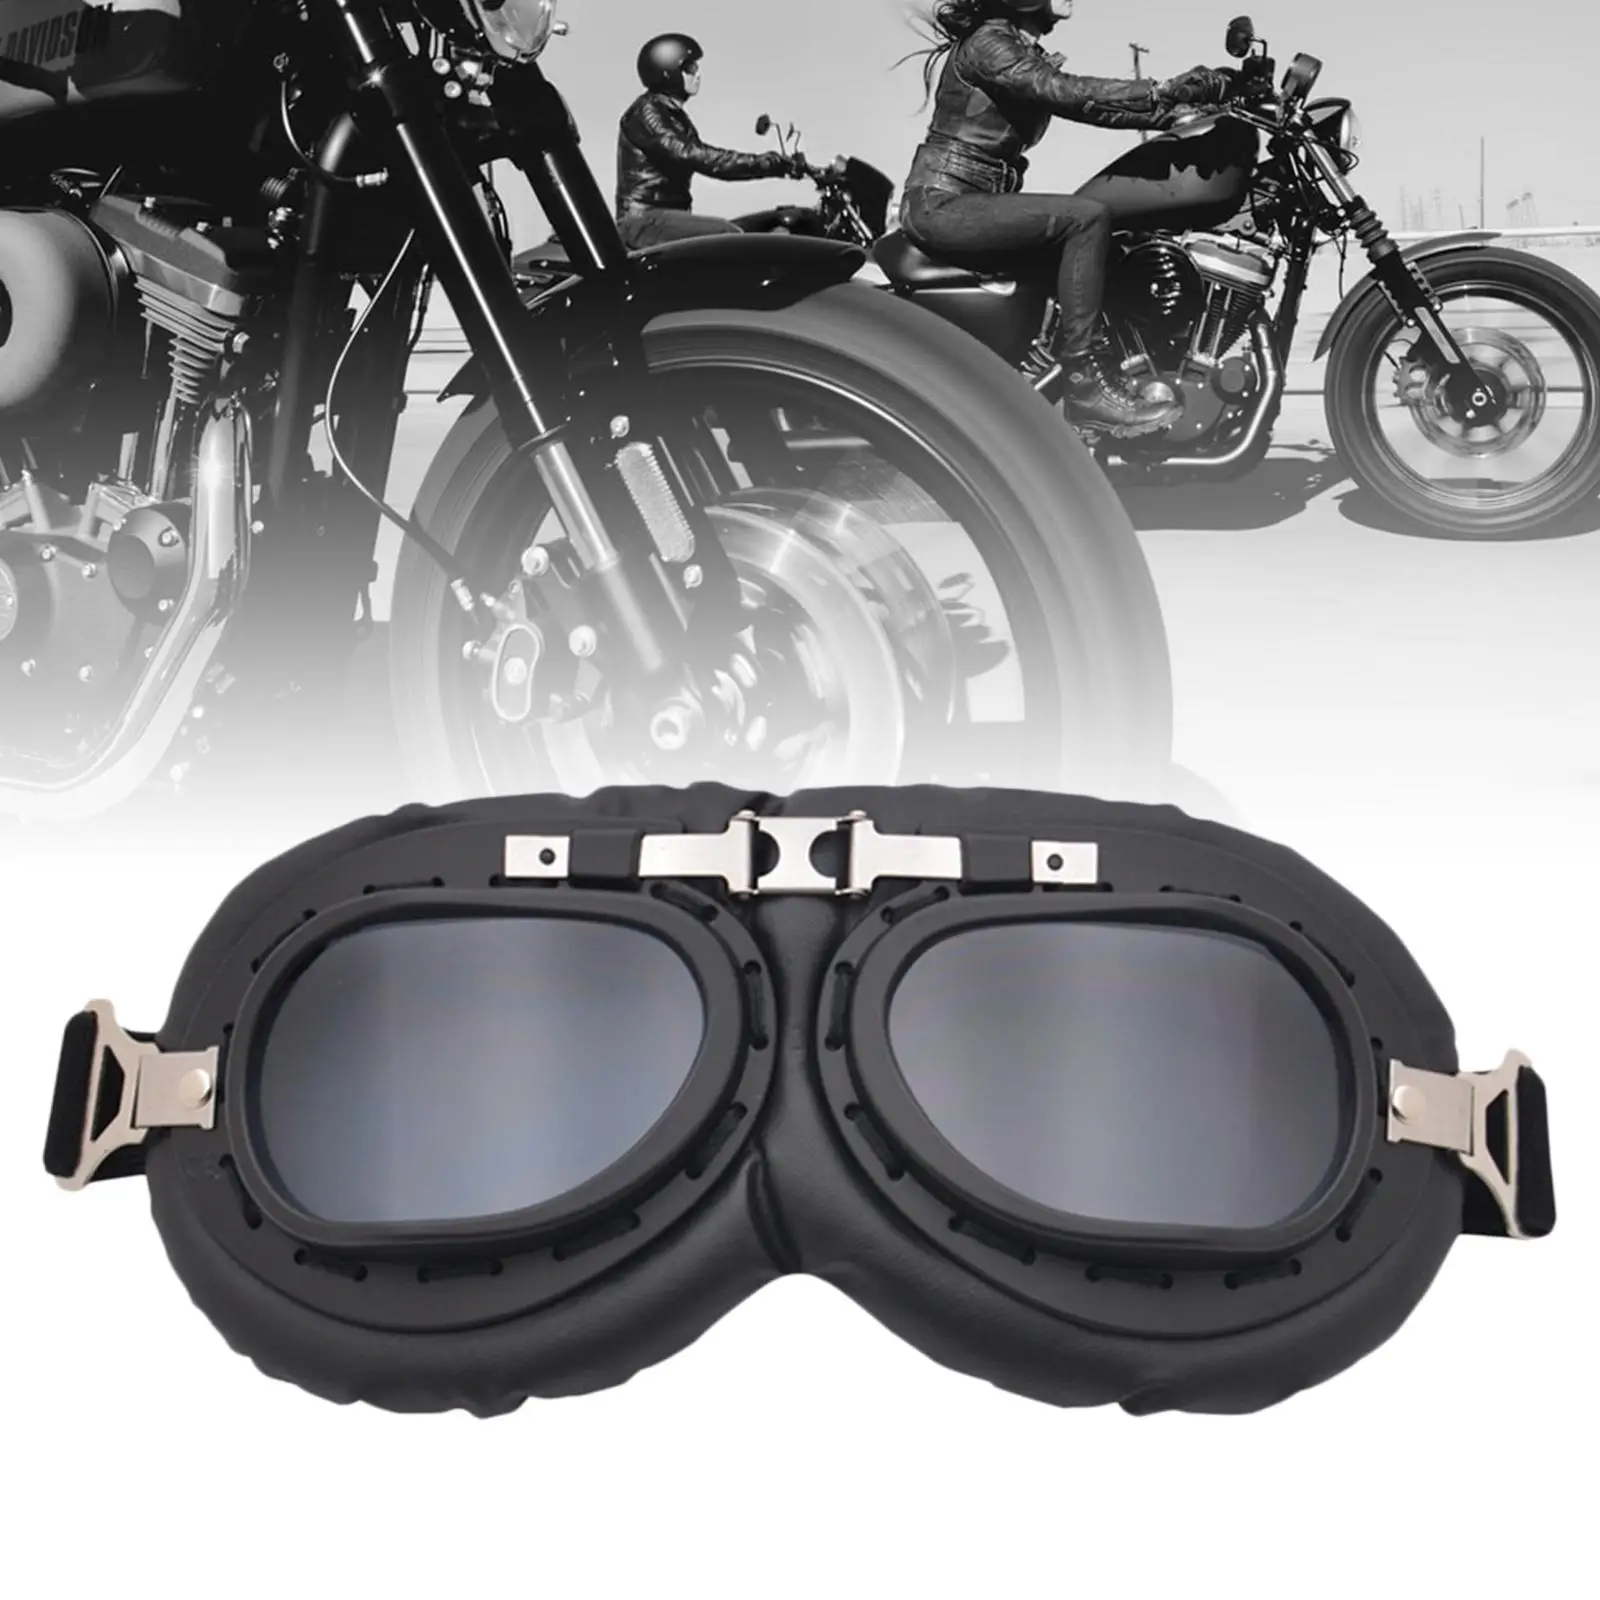 12x Motorcycle Goggles  Vintage Anti-Scratch Sports Glasses Outdoor Eyewear for Half  Riding Touring Racer